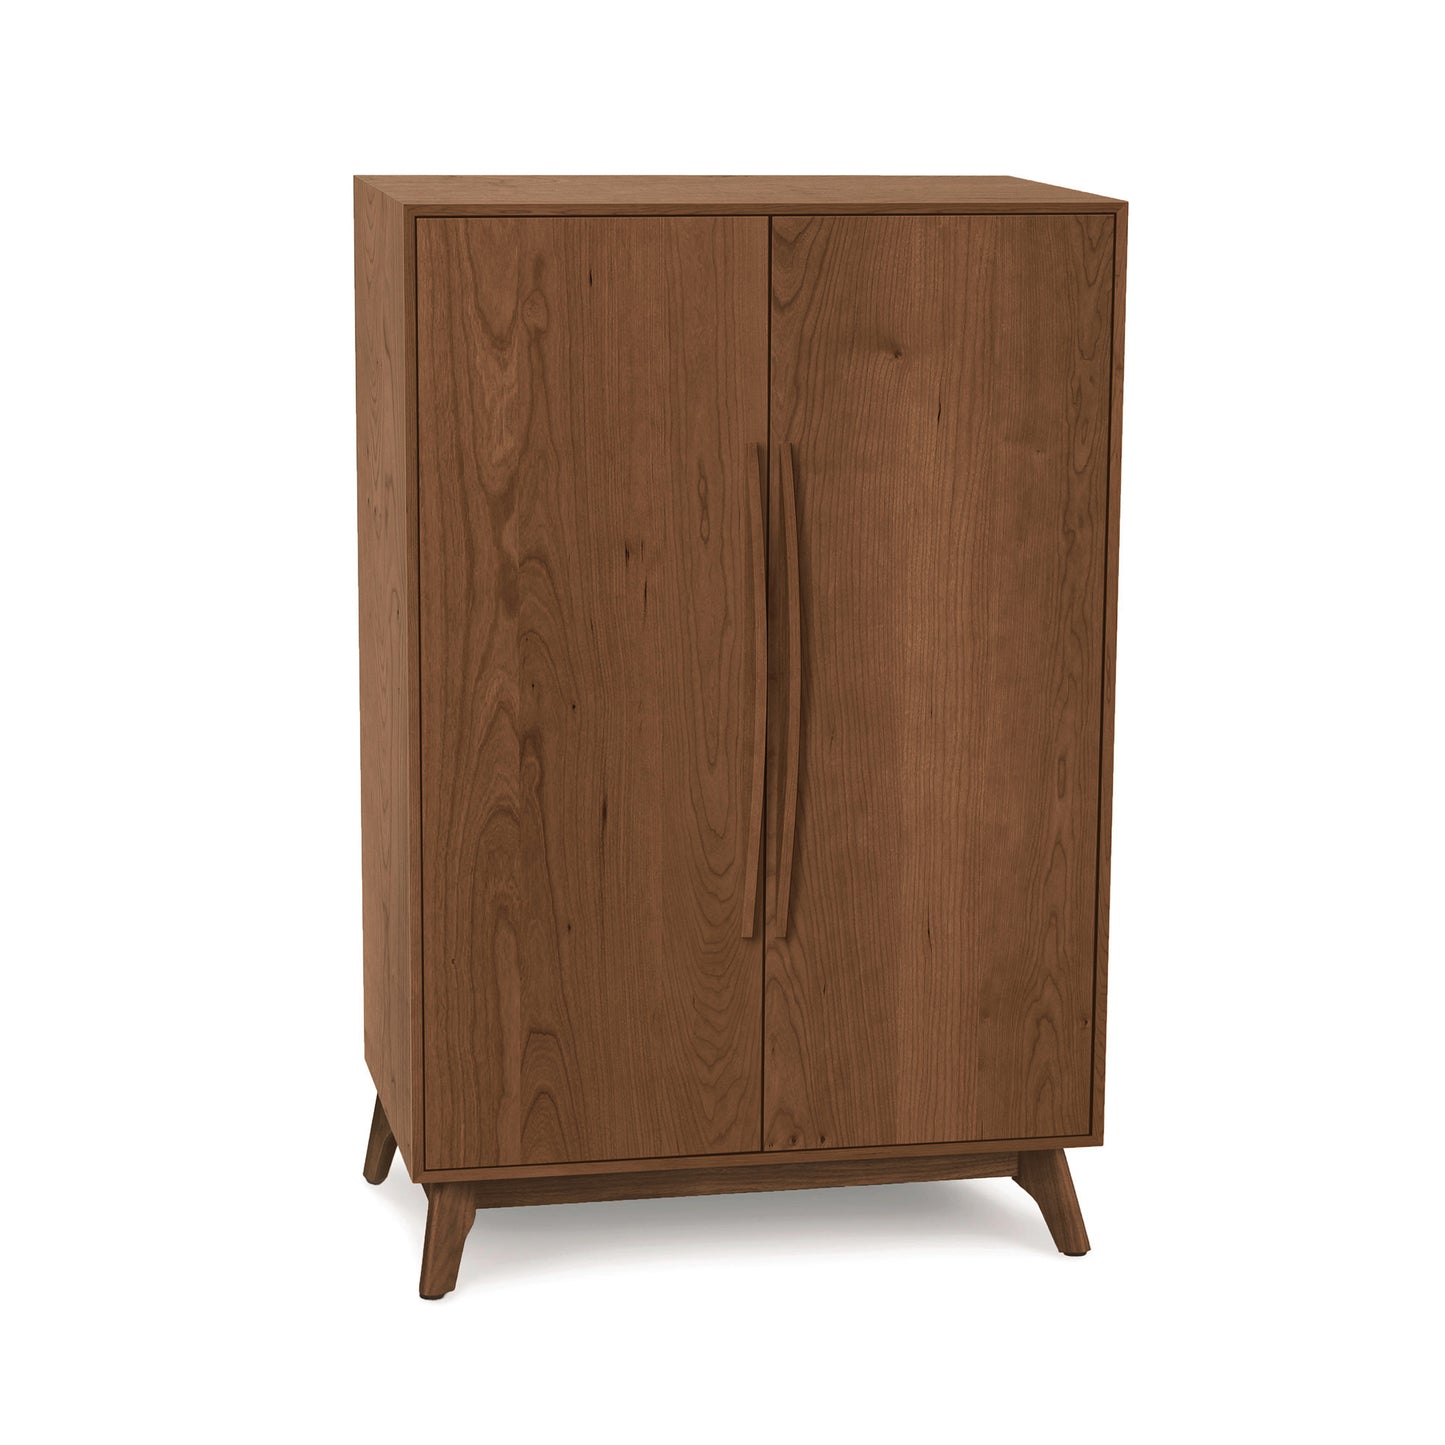 A Copeland Furniture Catalina Bar Cabinet designed for wine storage, with two doors on angled legs isolated on a white background.